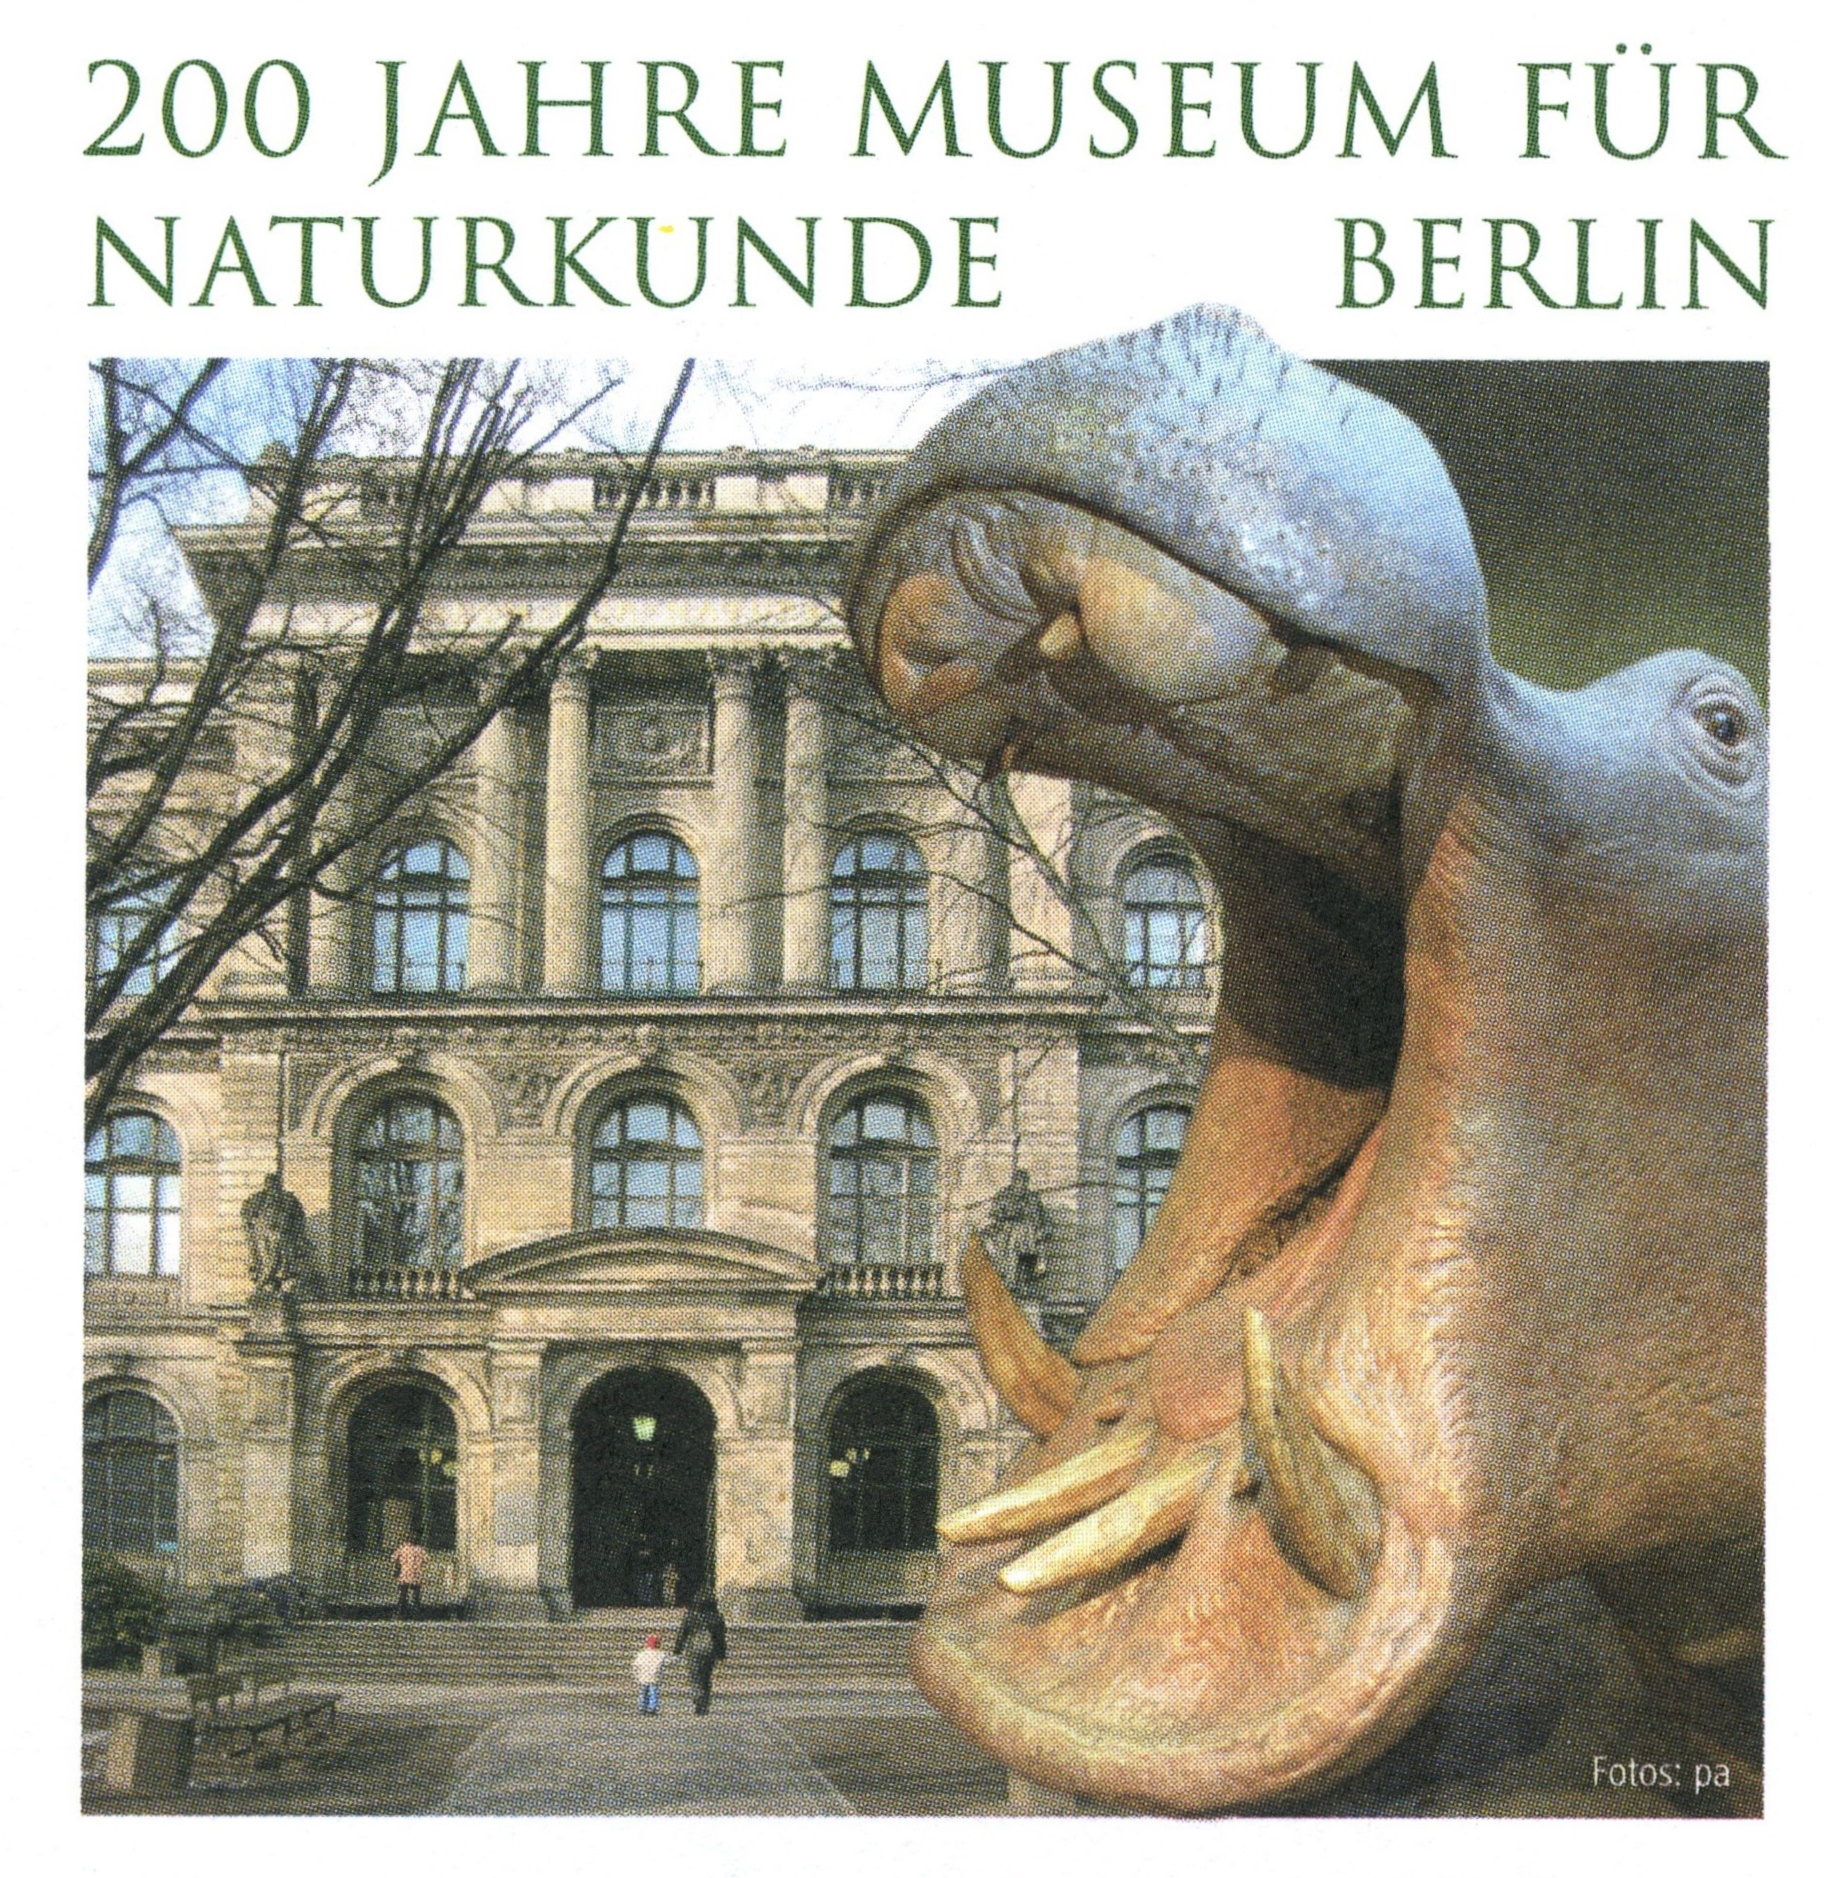 The main building of of Museum fuer Naturkunde in Berlin on cachet of FDC of Germany 2010